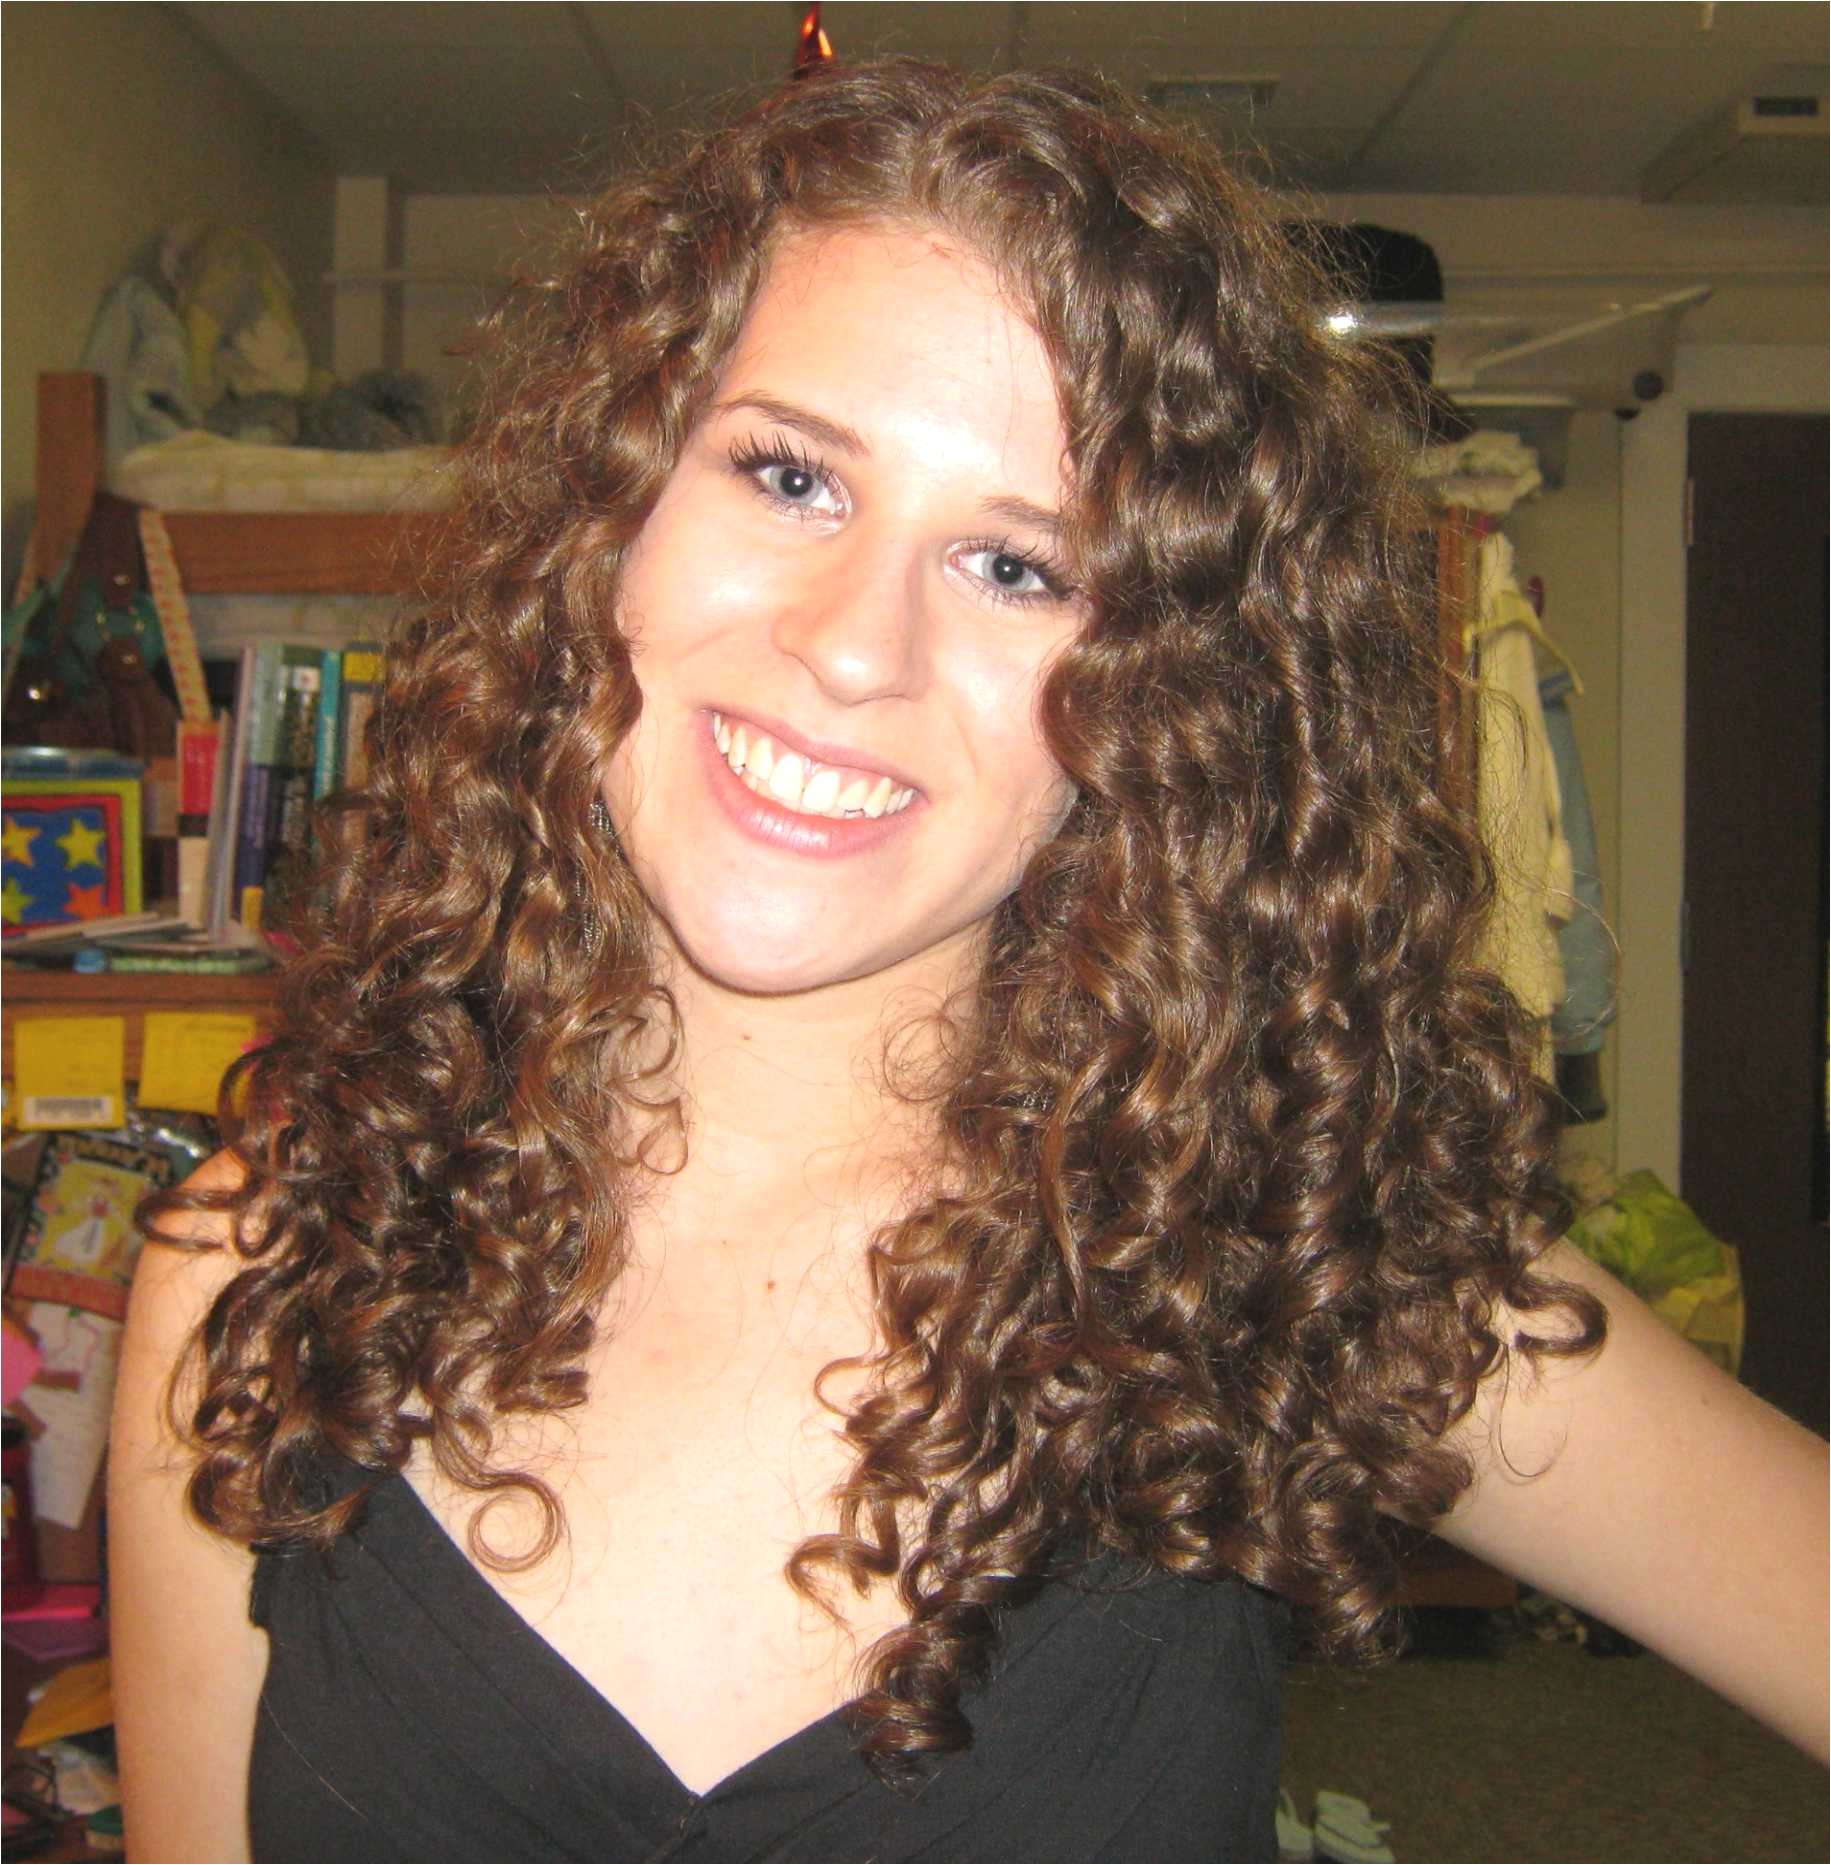 Curl Hairstyle at Home Inspirational Hairstyle Curls Long Hair Very Curly Hairstyles Fresh Curly Hair styling naturally